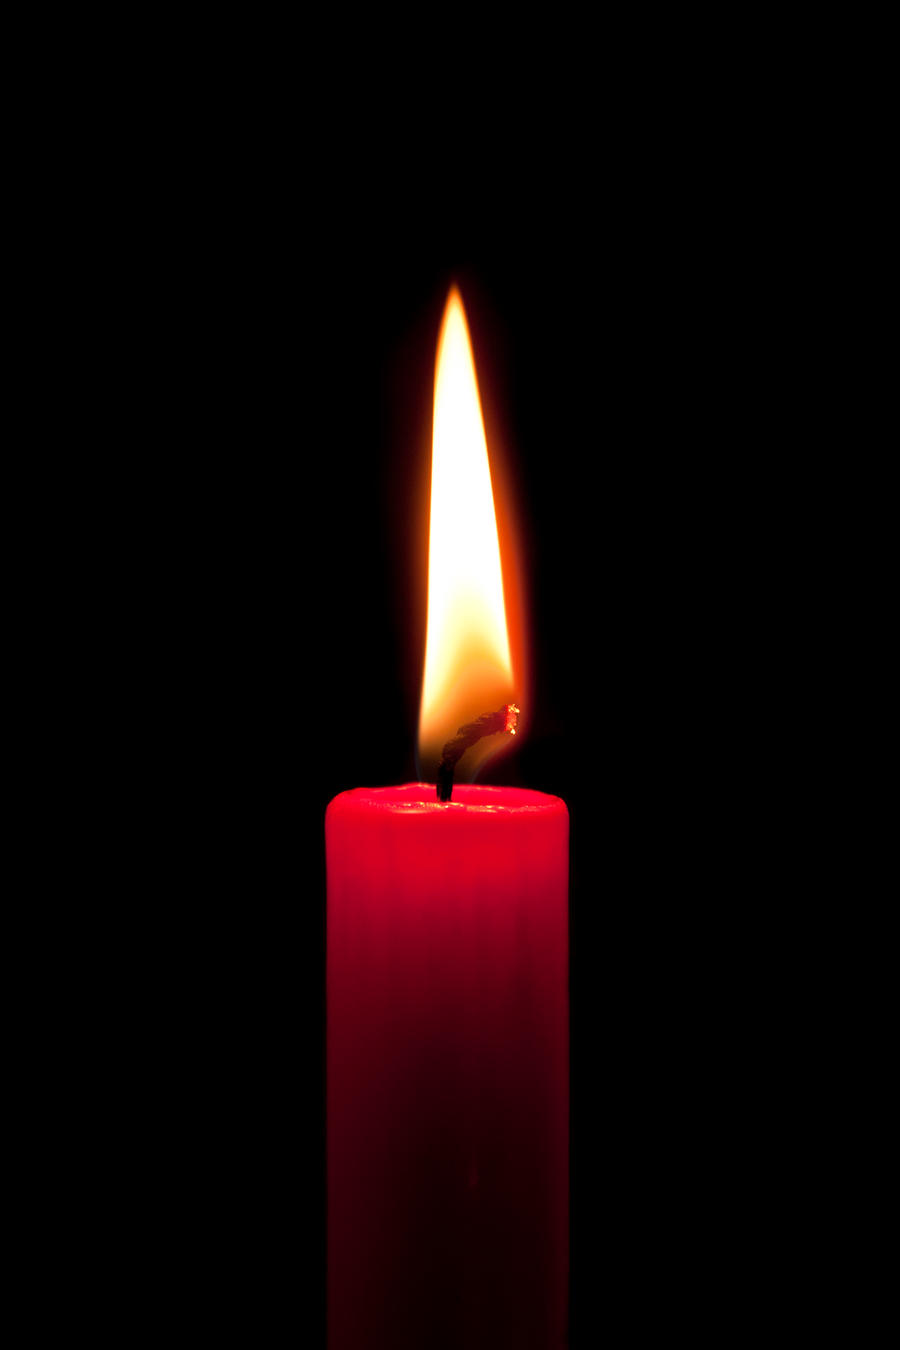 http://fc03.deviantart.net/fs70/i/2010/354/9/3/red_candle_by_rainbows_stock-d35a3w1.jpg